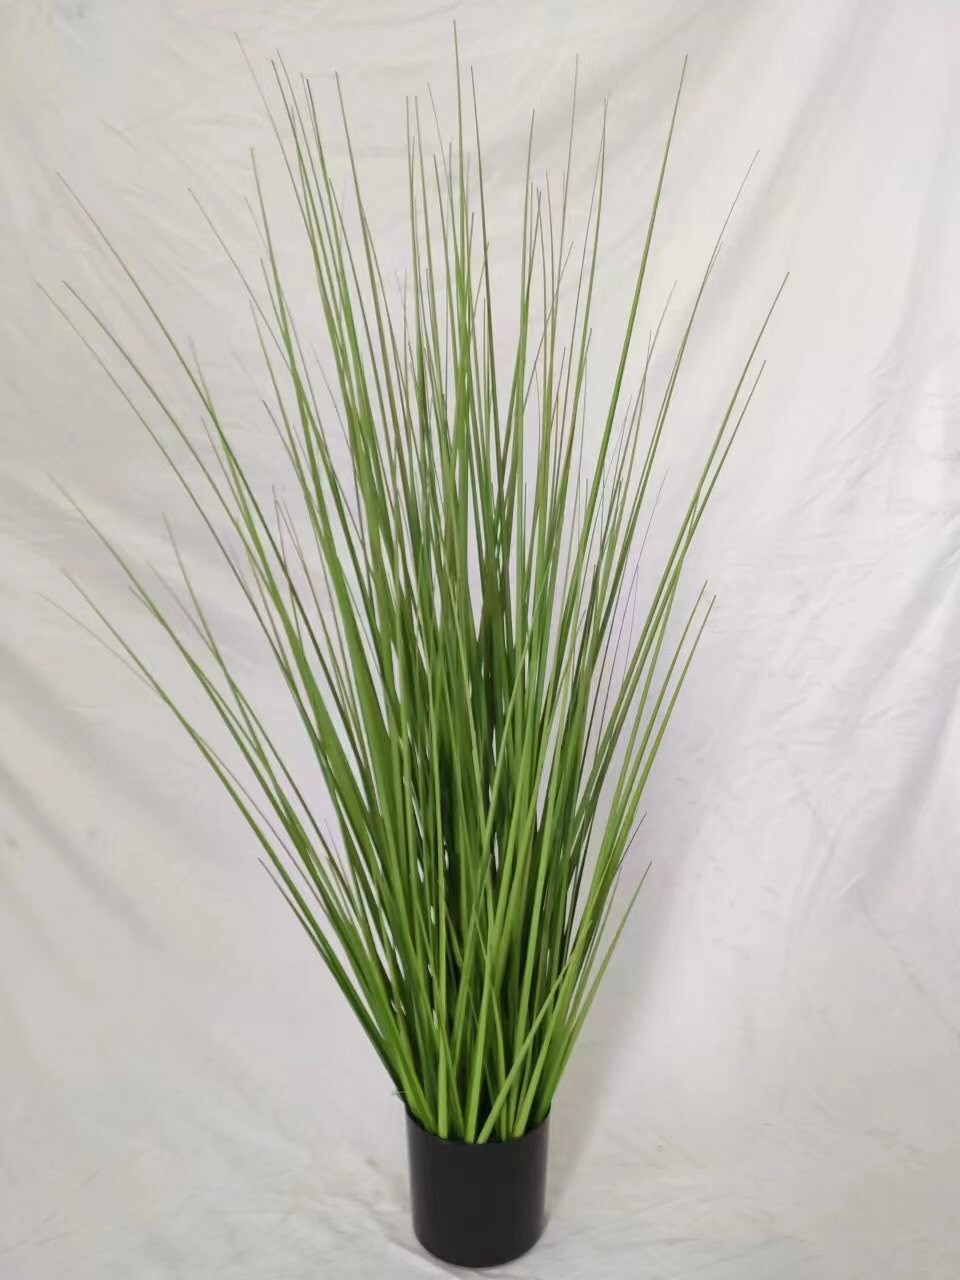 Decorative 3-Foot Tall Artificial Grass in Stylish Ceramic Pot - Perfect for Indoor and Outdoor Home Decor